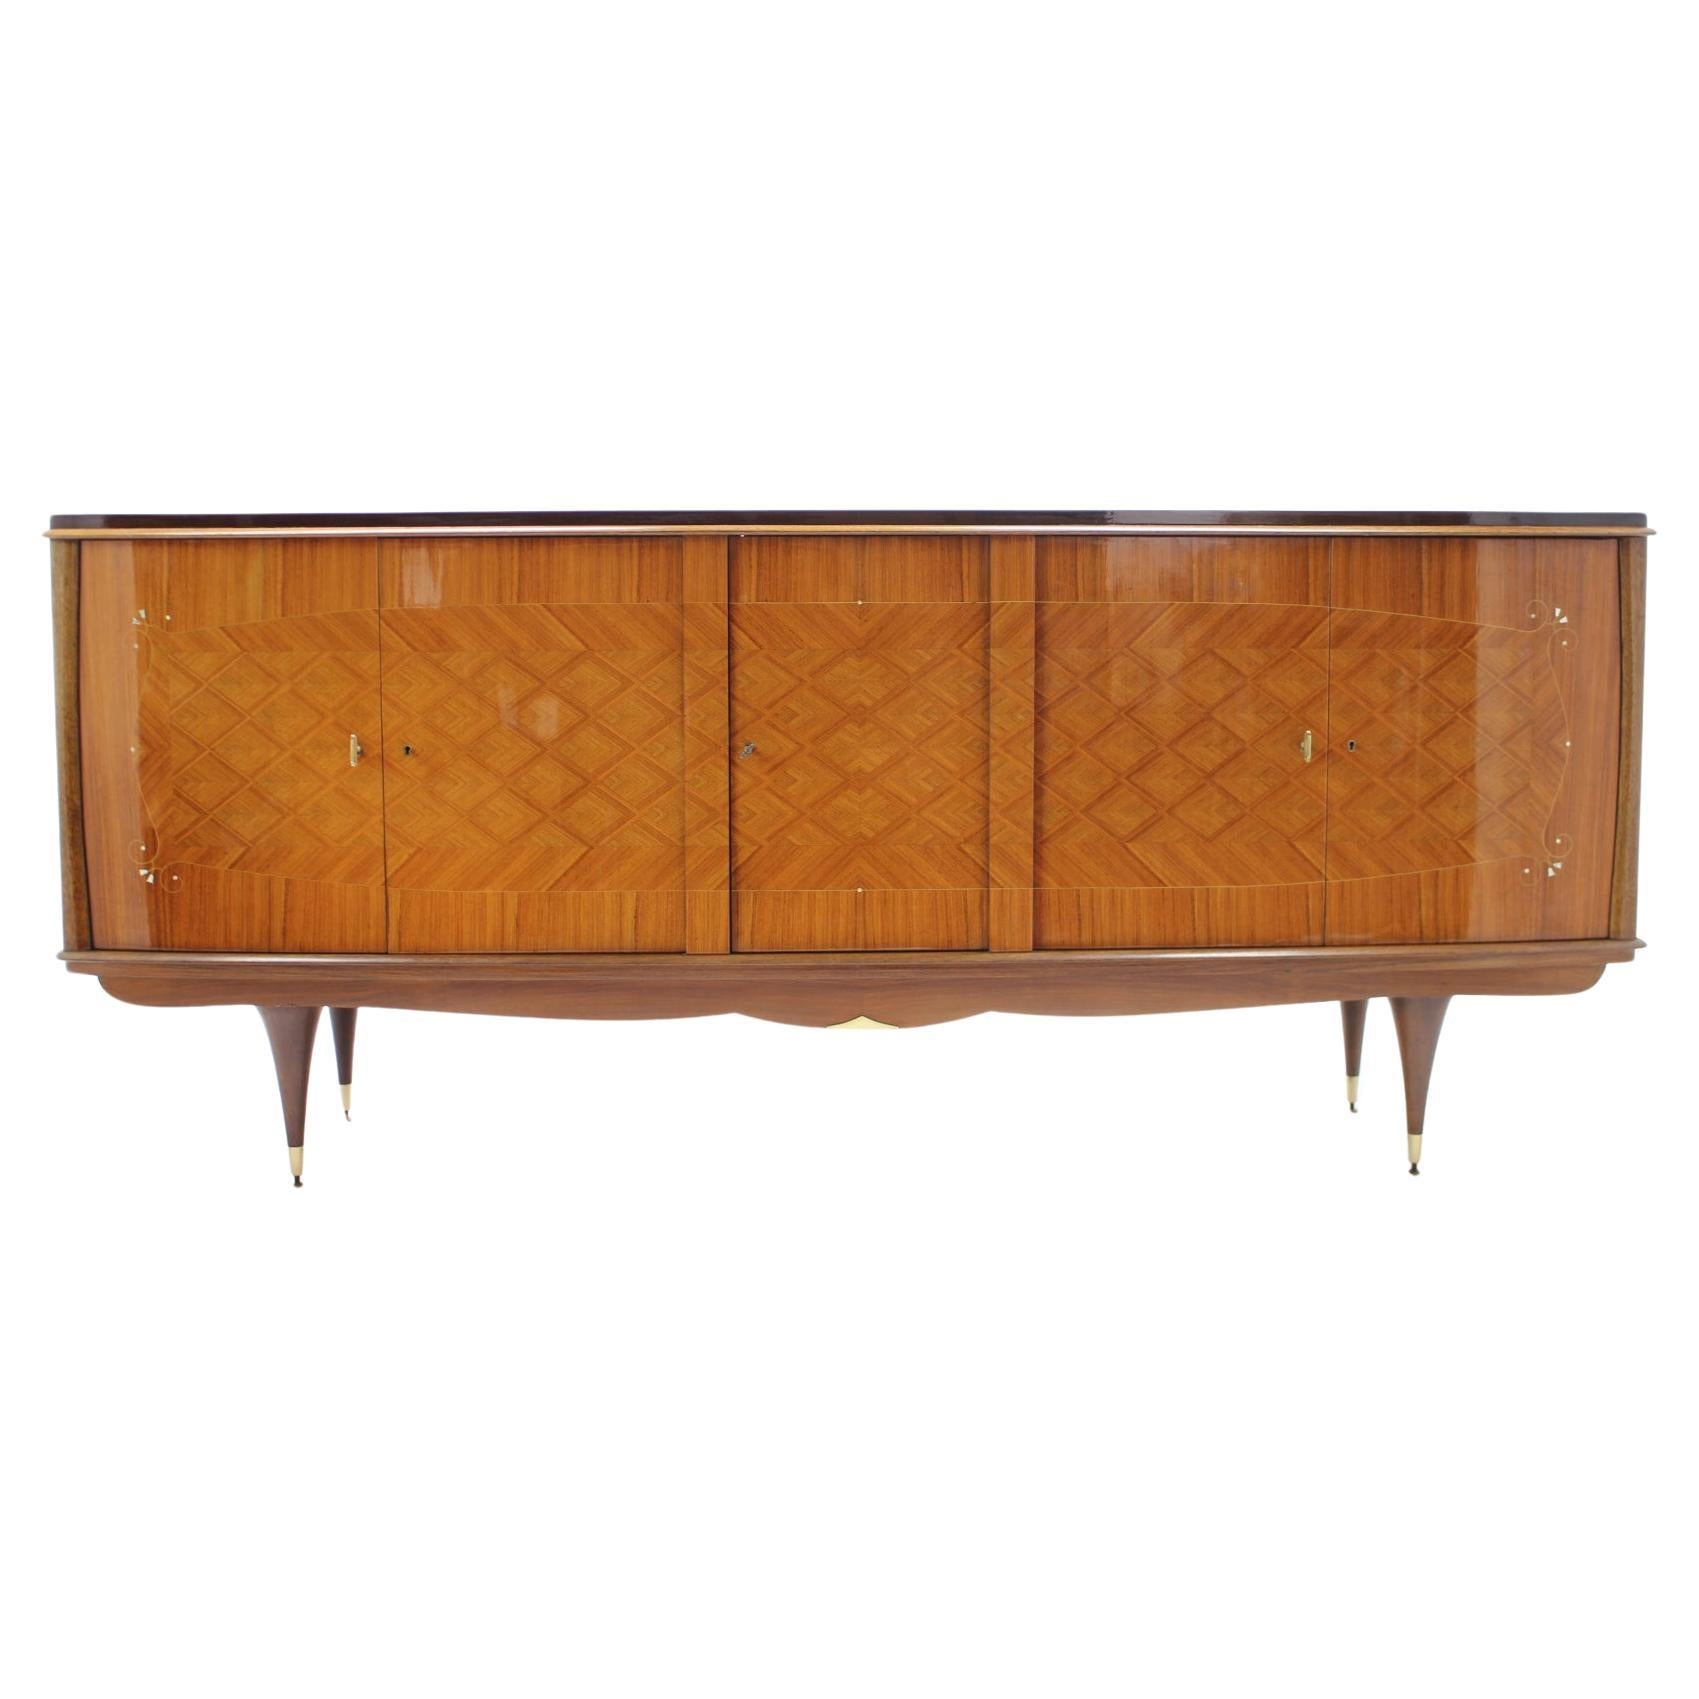 1960s Wooden Sideboard in High Gloss Finish, Italy  For Sale